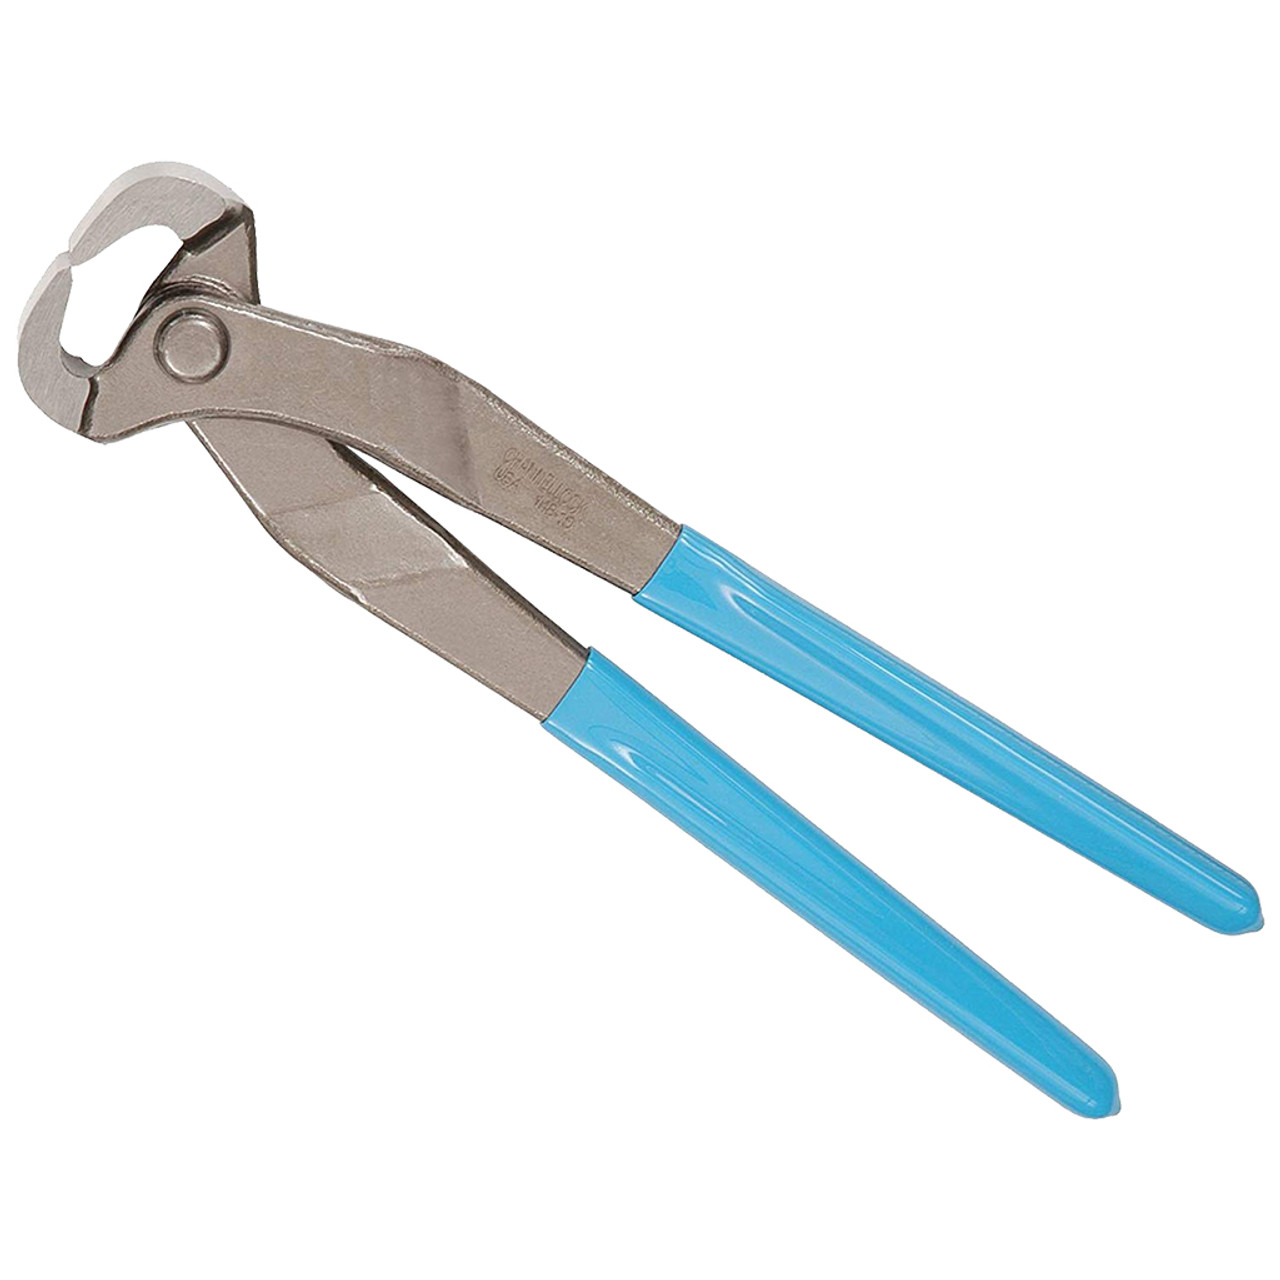 Channellock End Nippers, Pliers